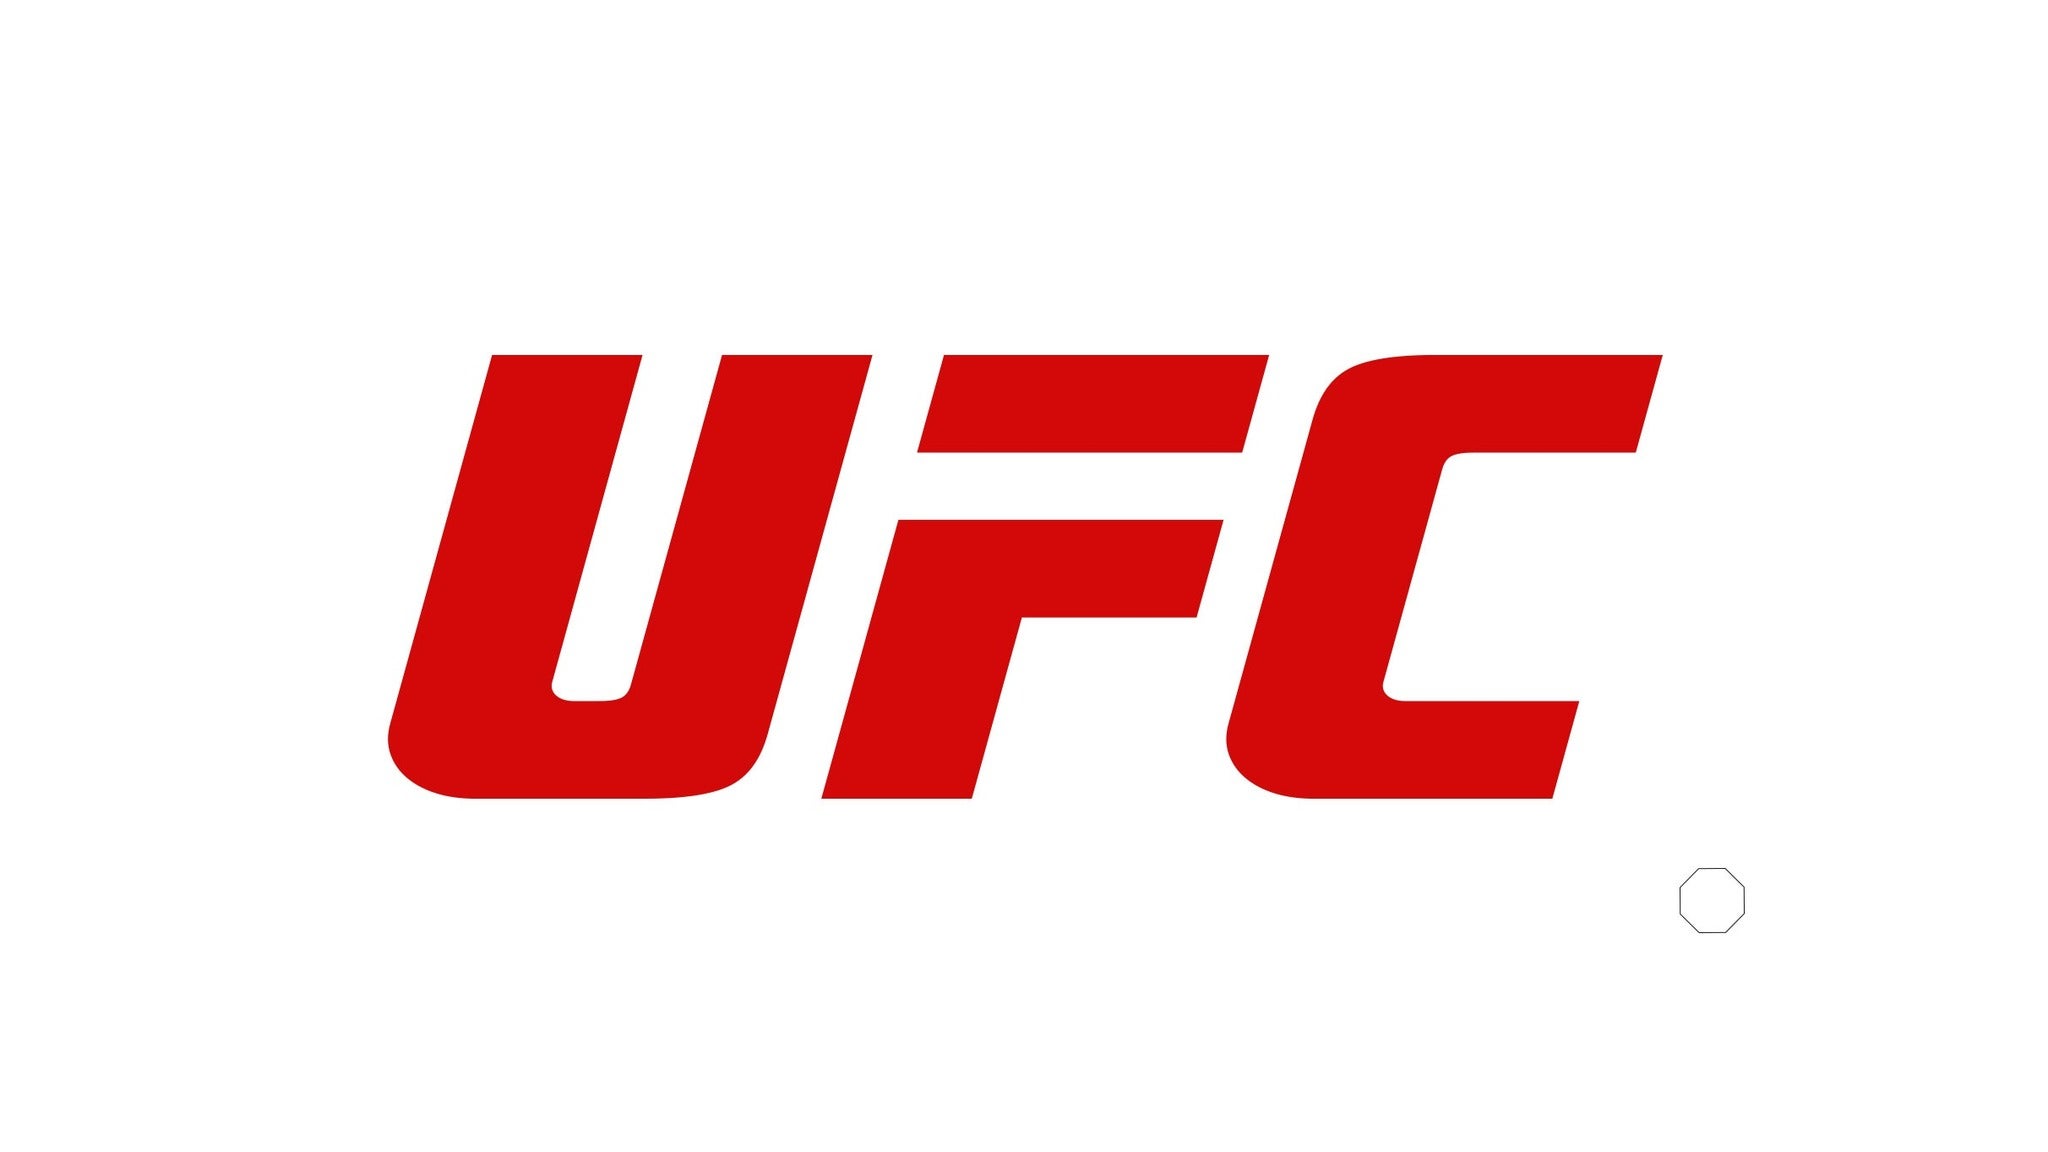 working presale code for UFC Fight Night tickets in Orlando at Amway Center